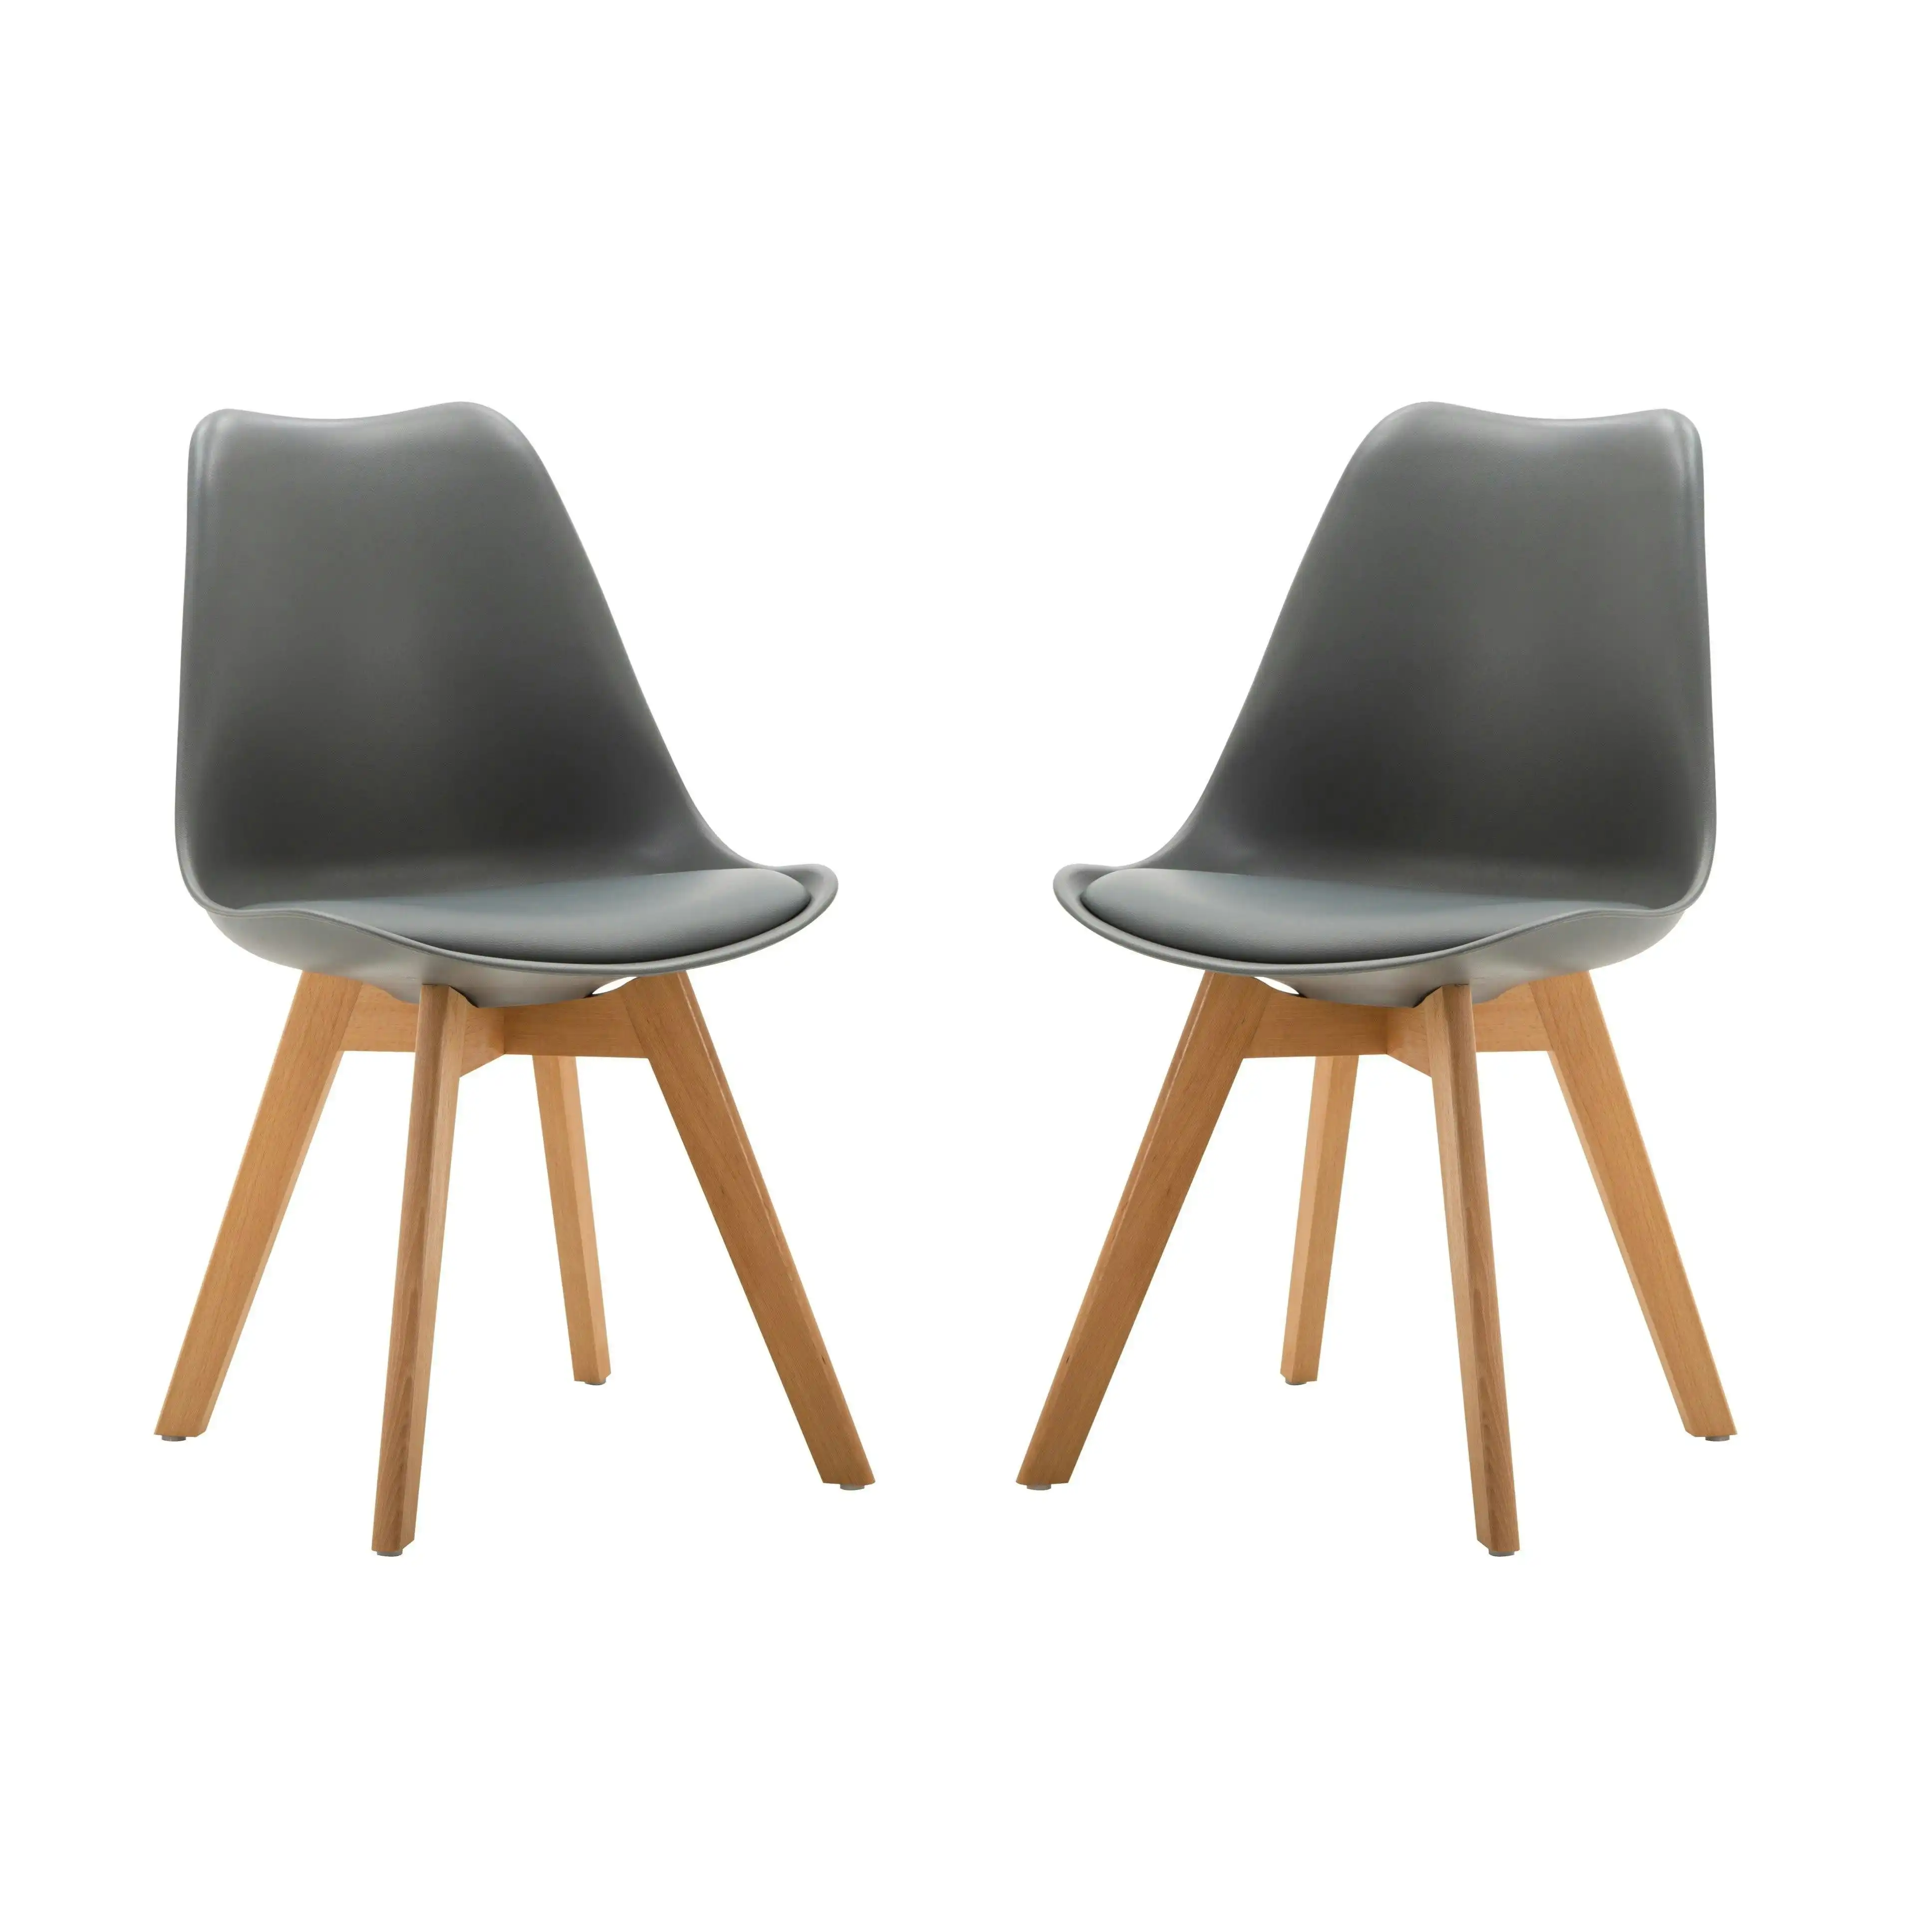 Chotto - Ando Dining Chairs - Grey x 2